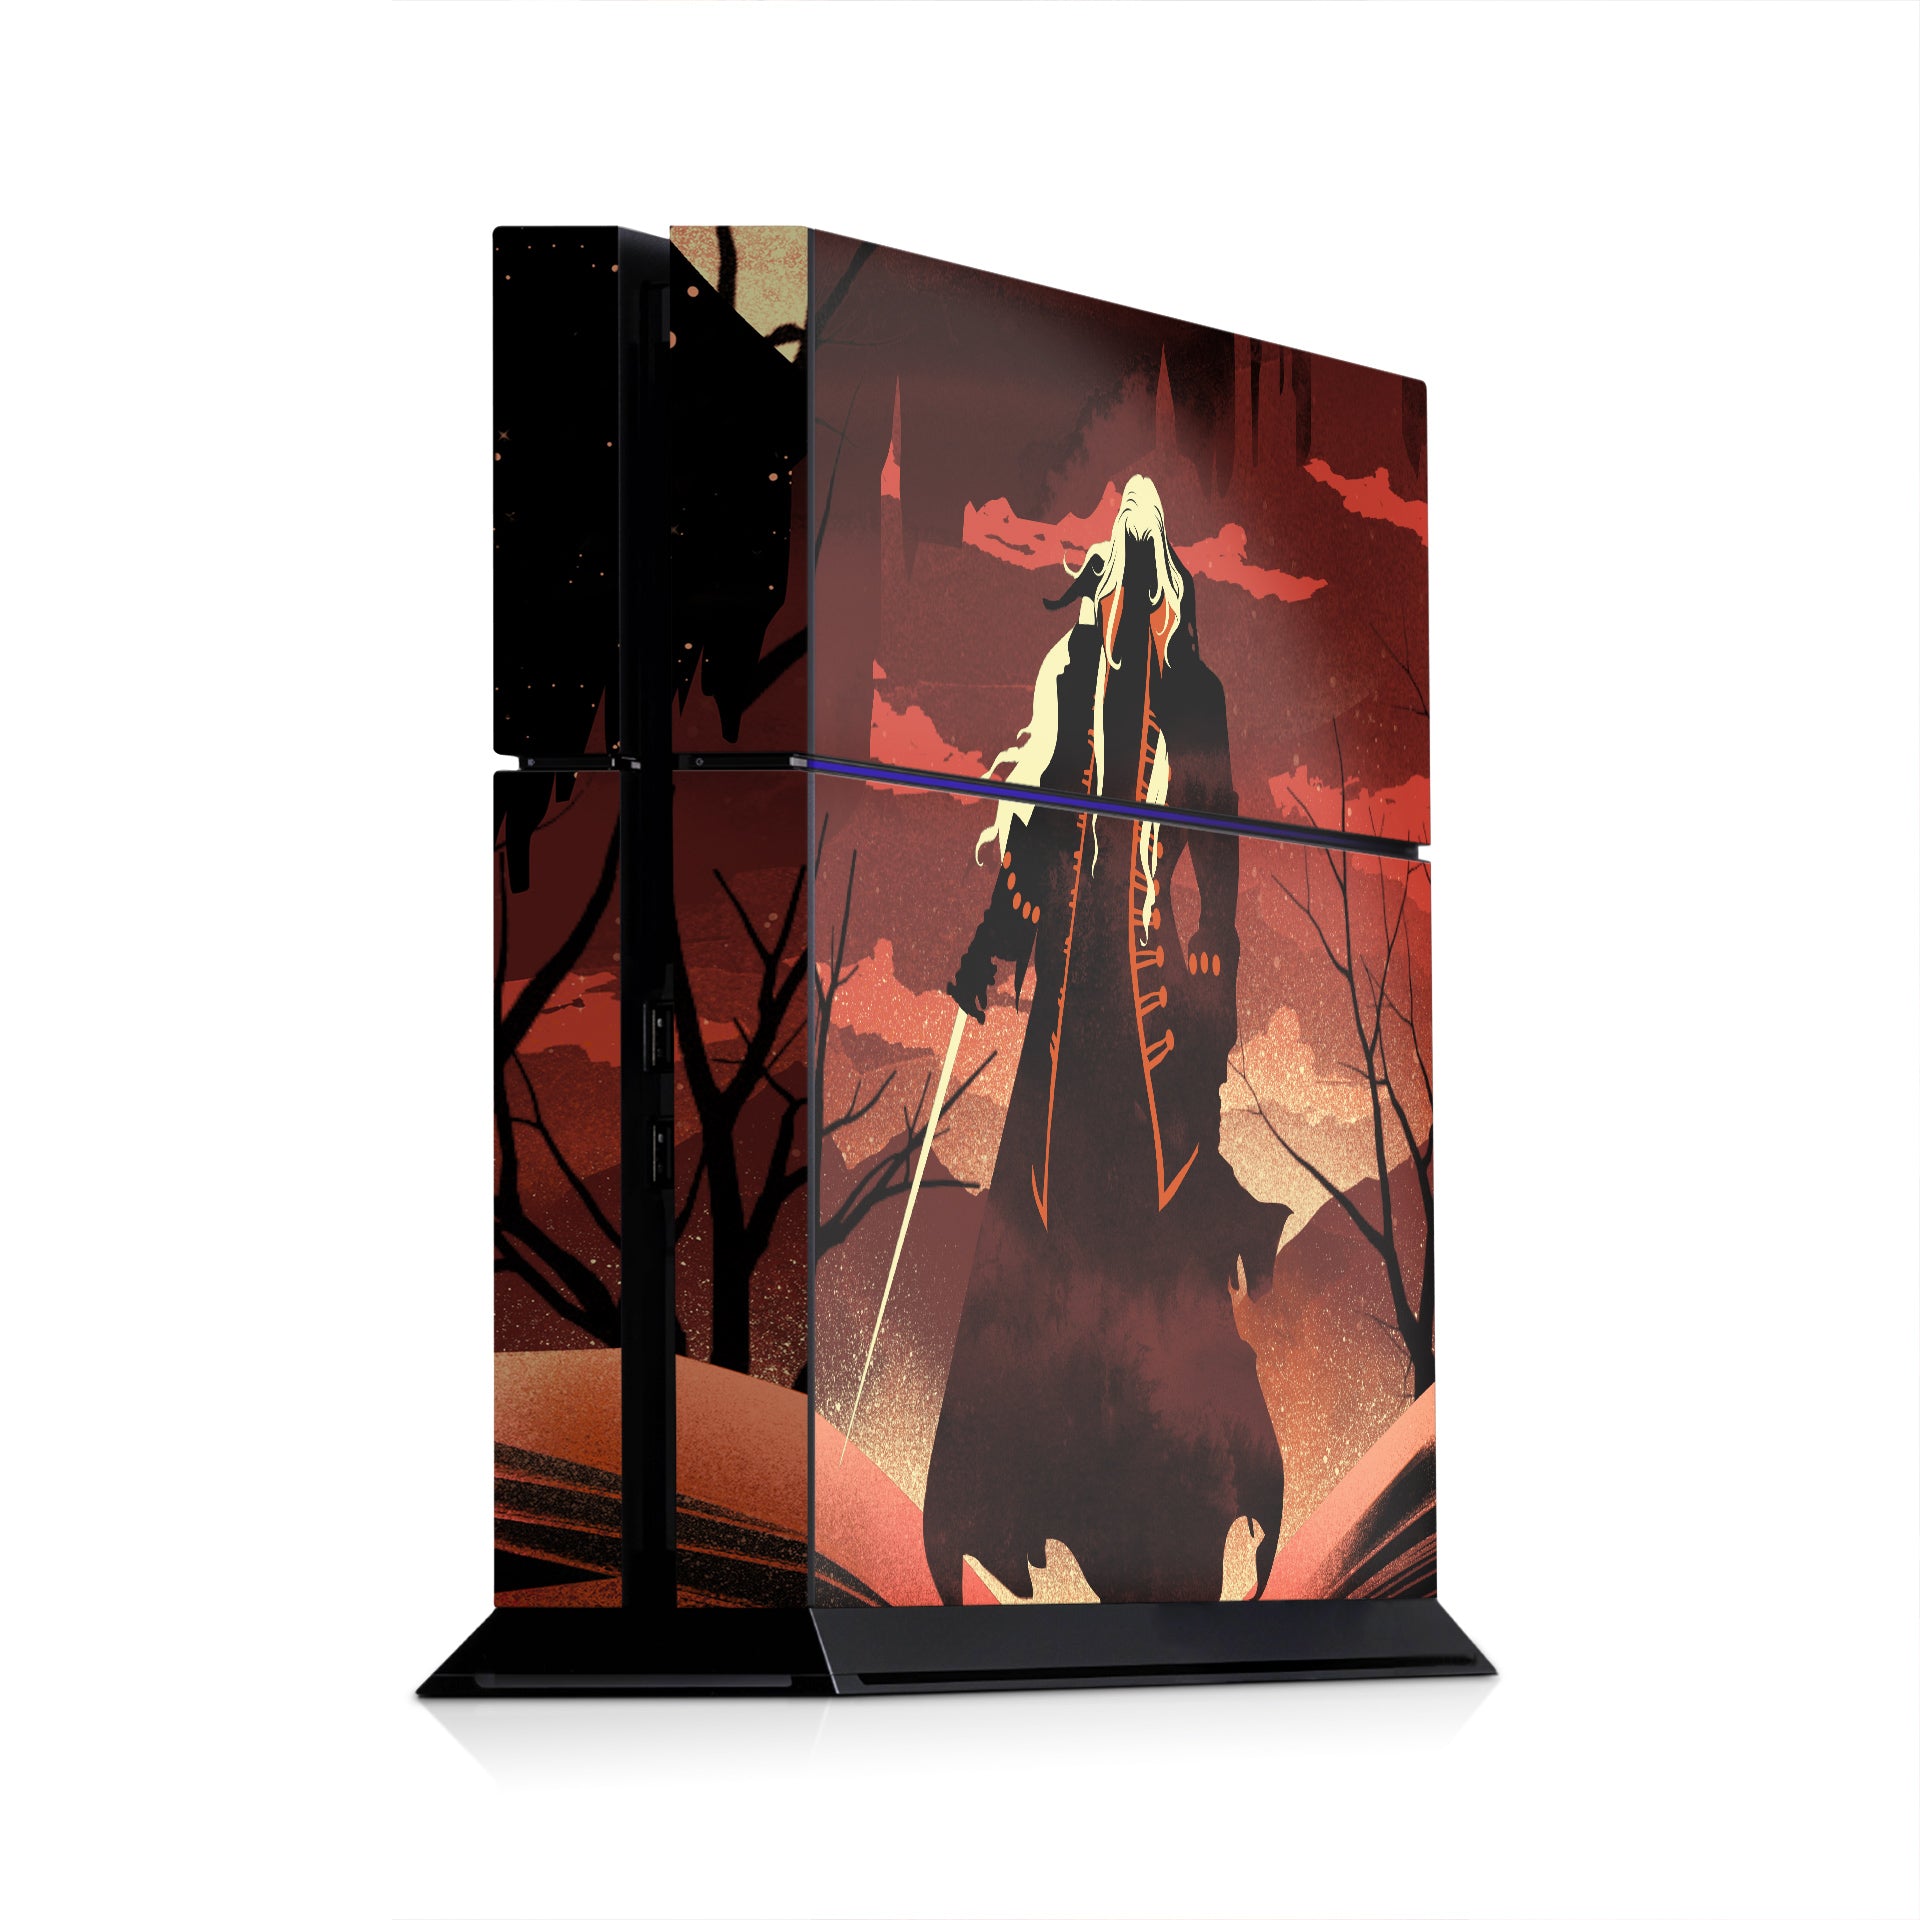 castlevania-console-skin-for-ps4